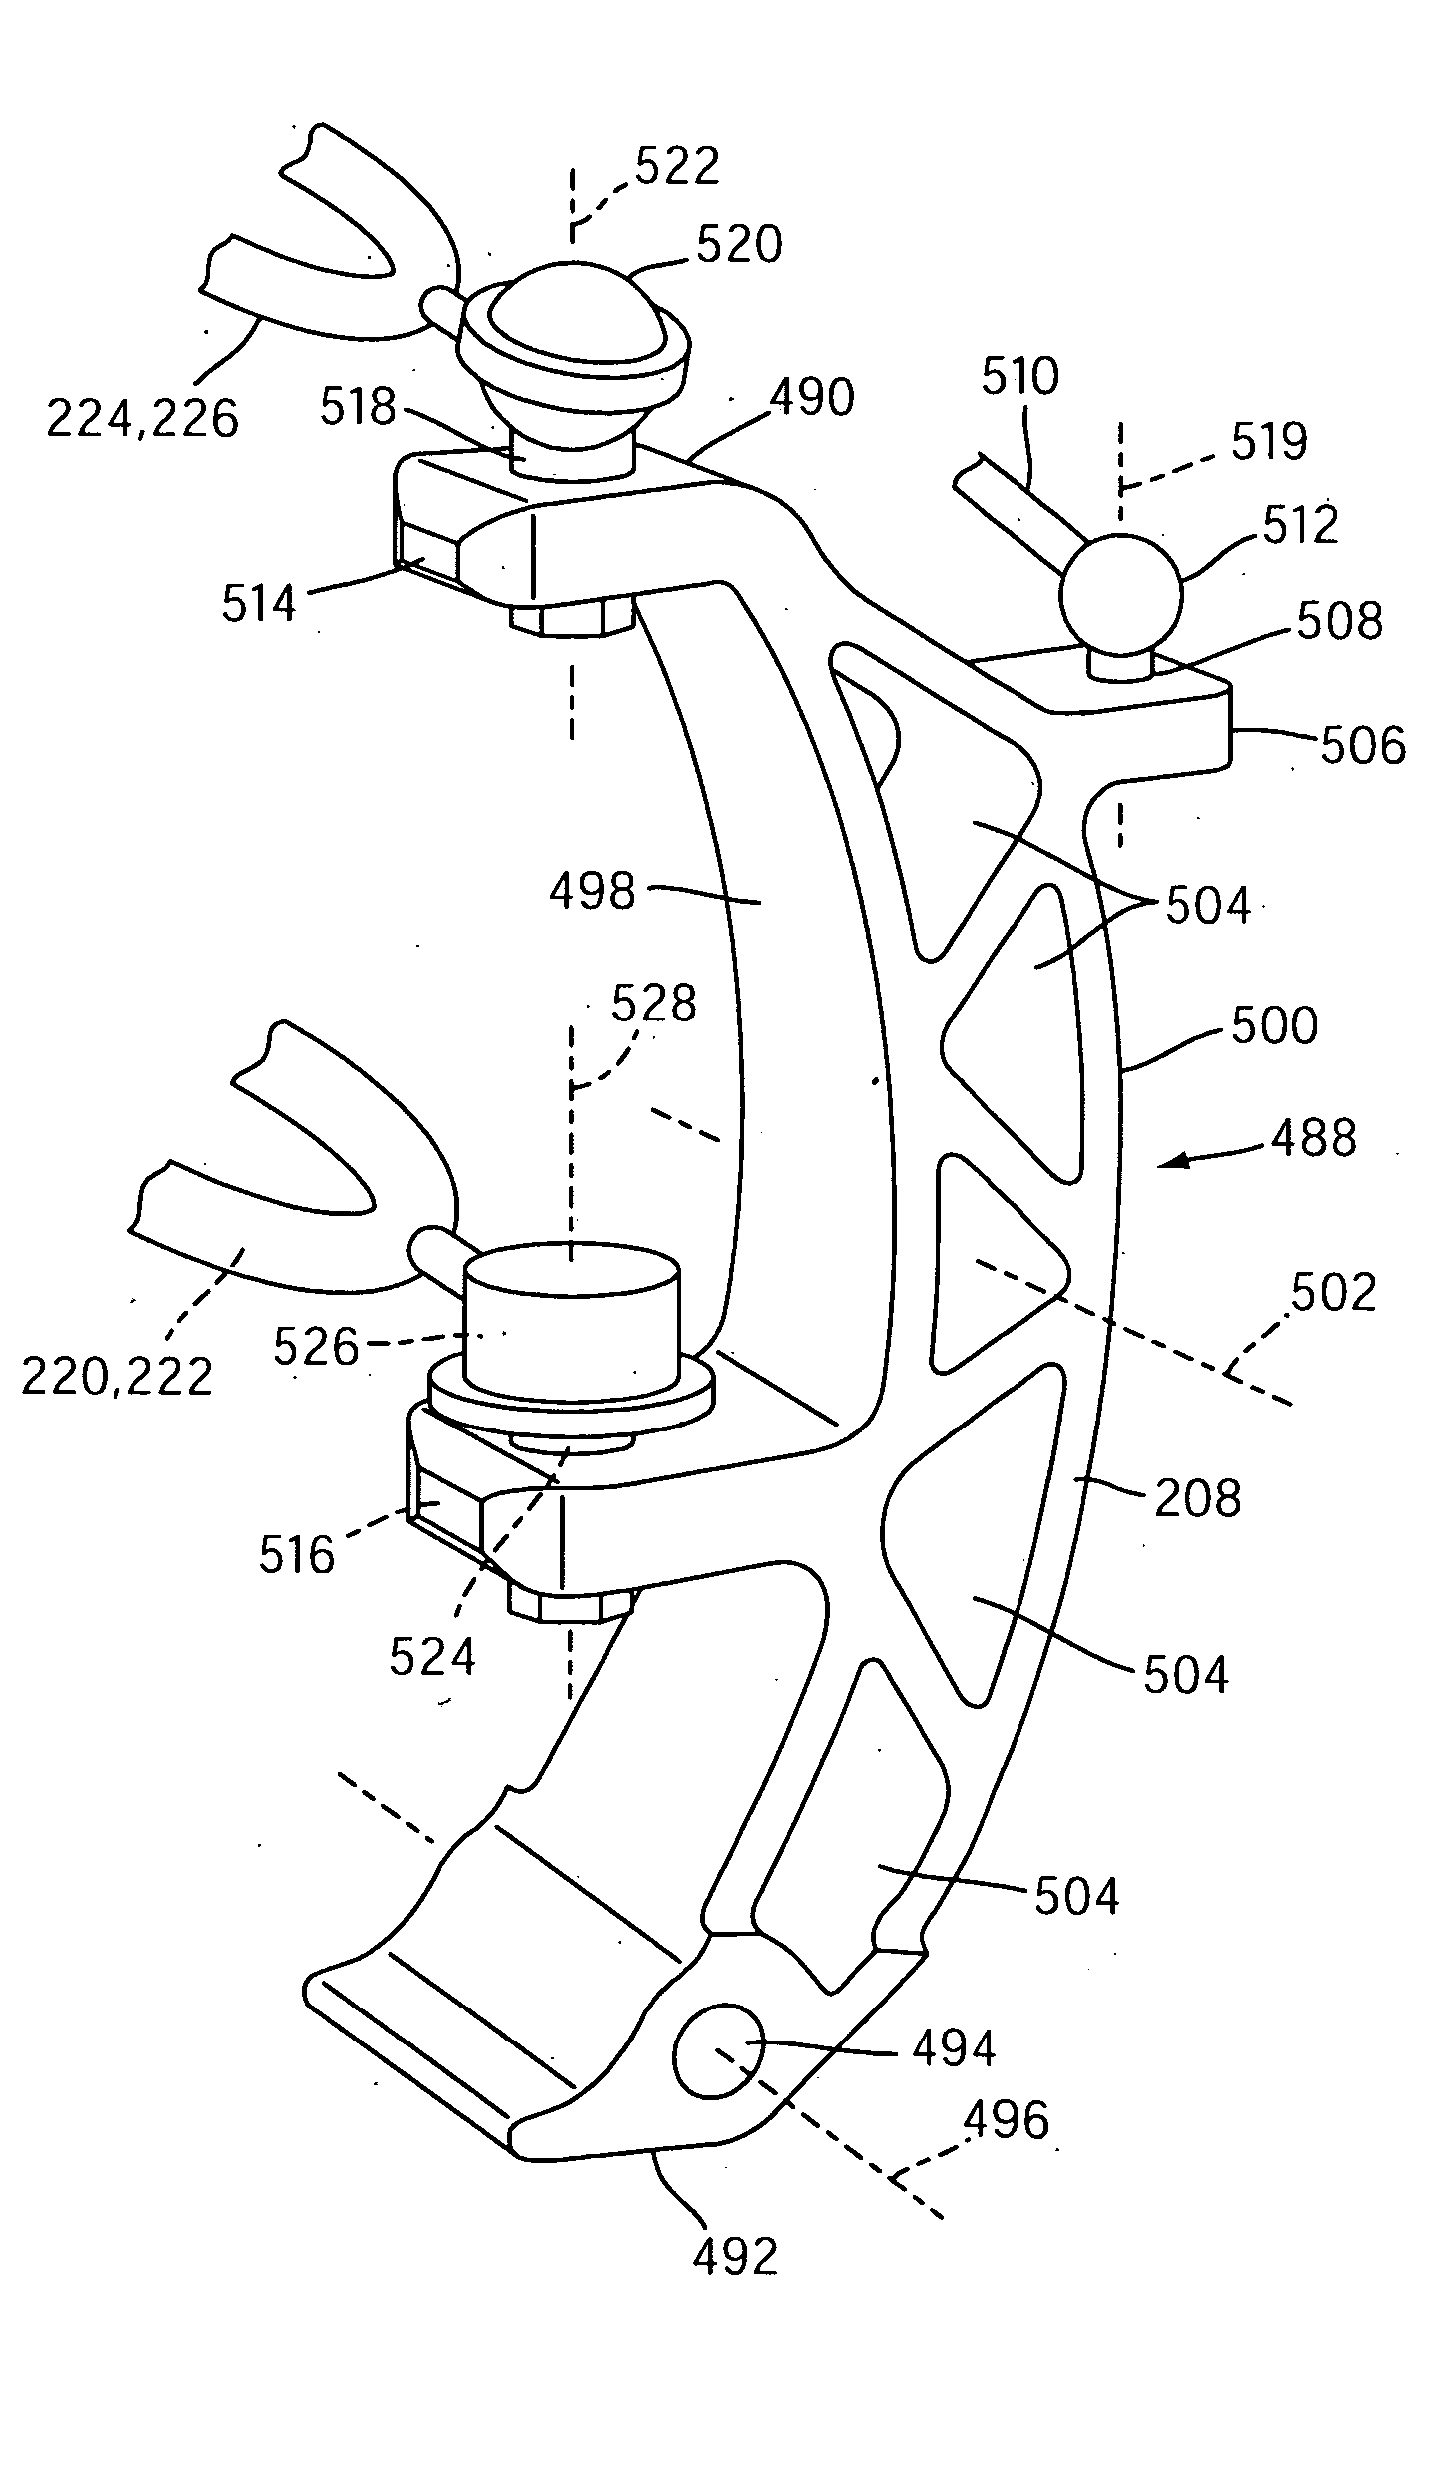 Front suspension with three ball joints for a vehicle